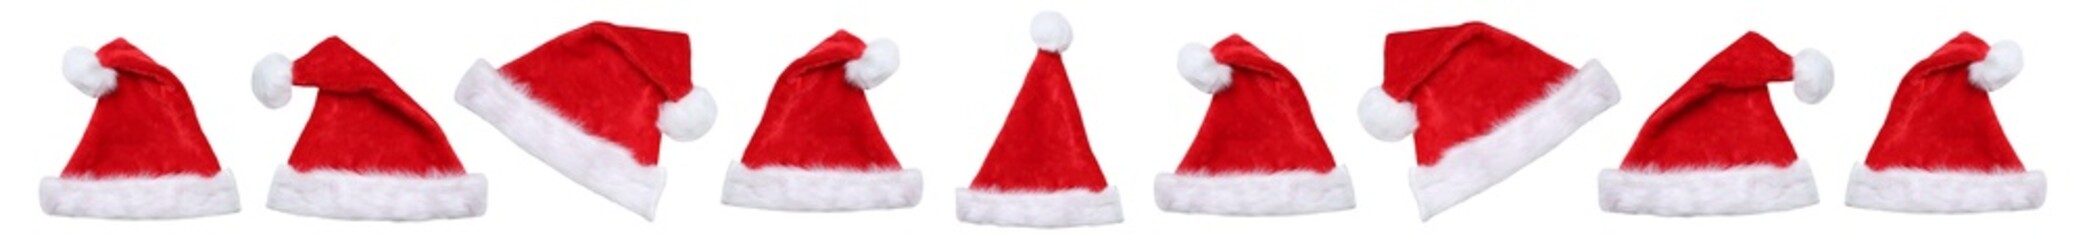 Christmas Santa Claus hats hat in a row winter panorama isolated on a white background